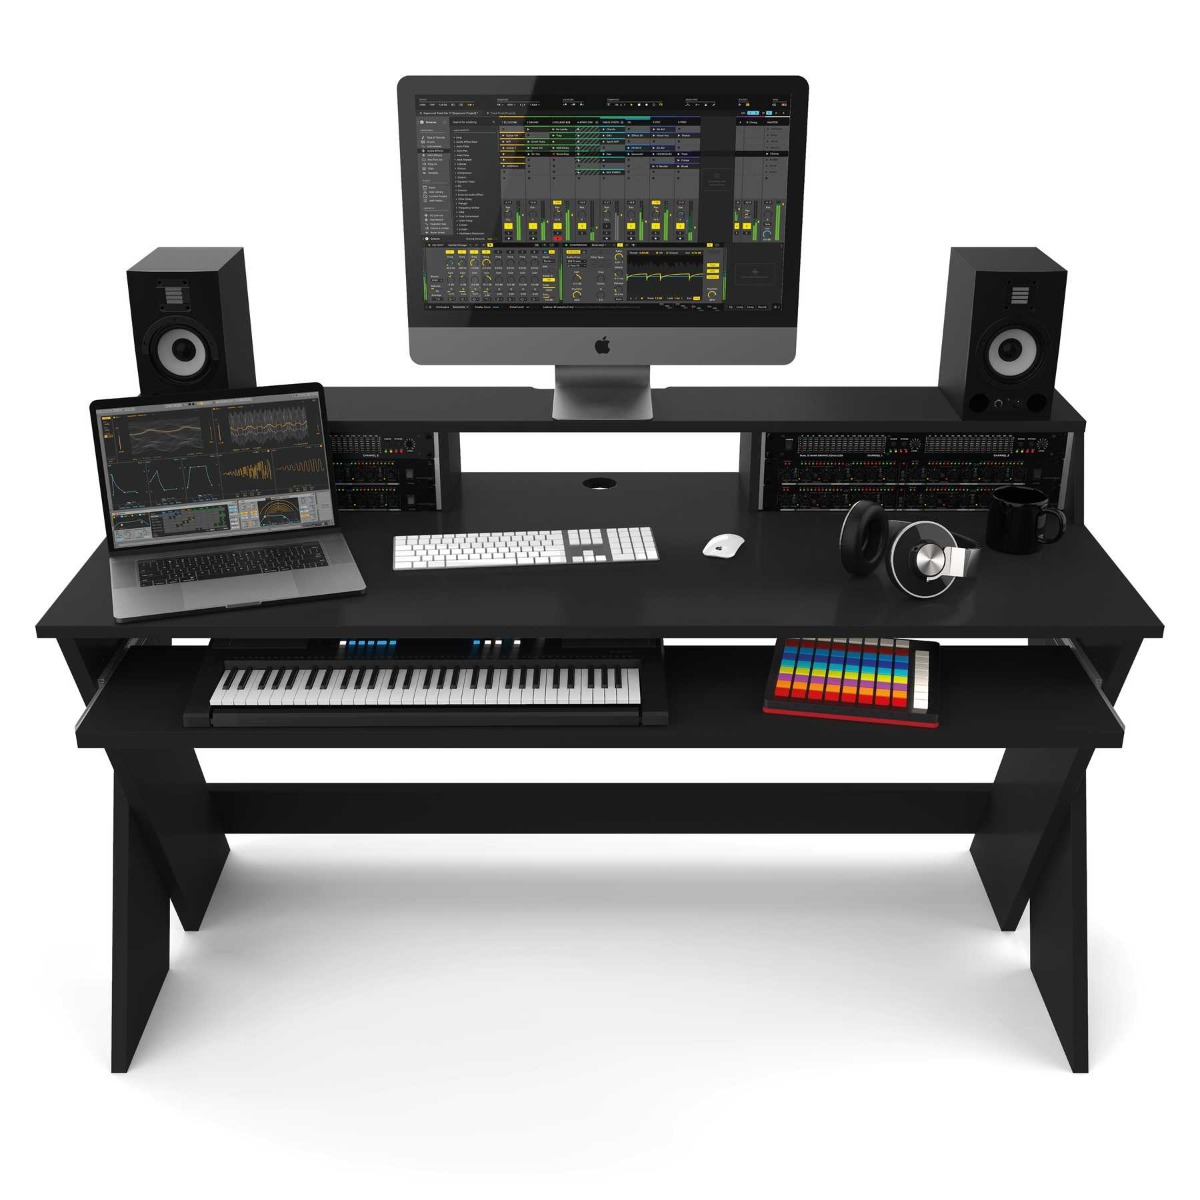 Glorious Sound Desk Pro Black Furniture For Djs Producers And